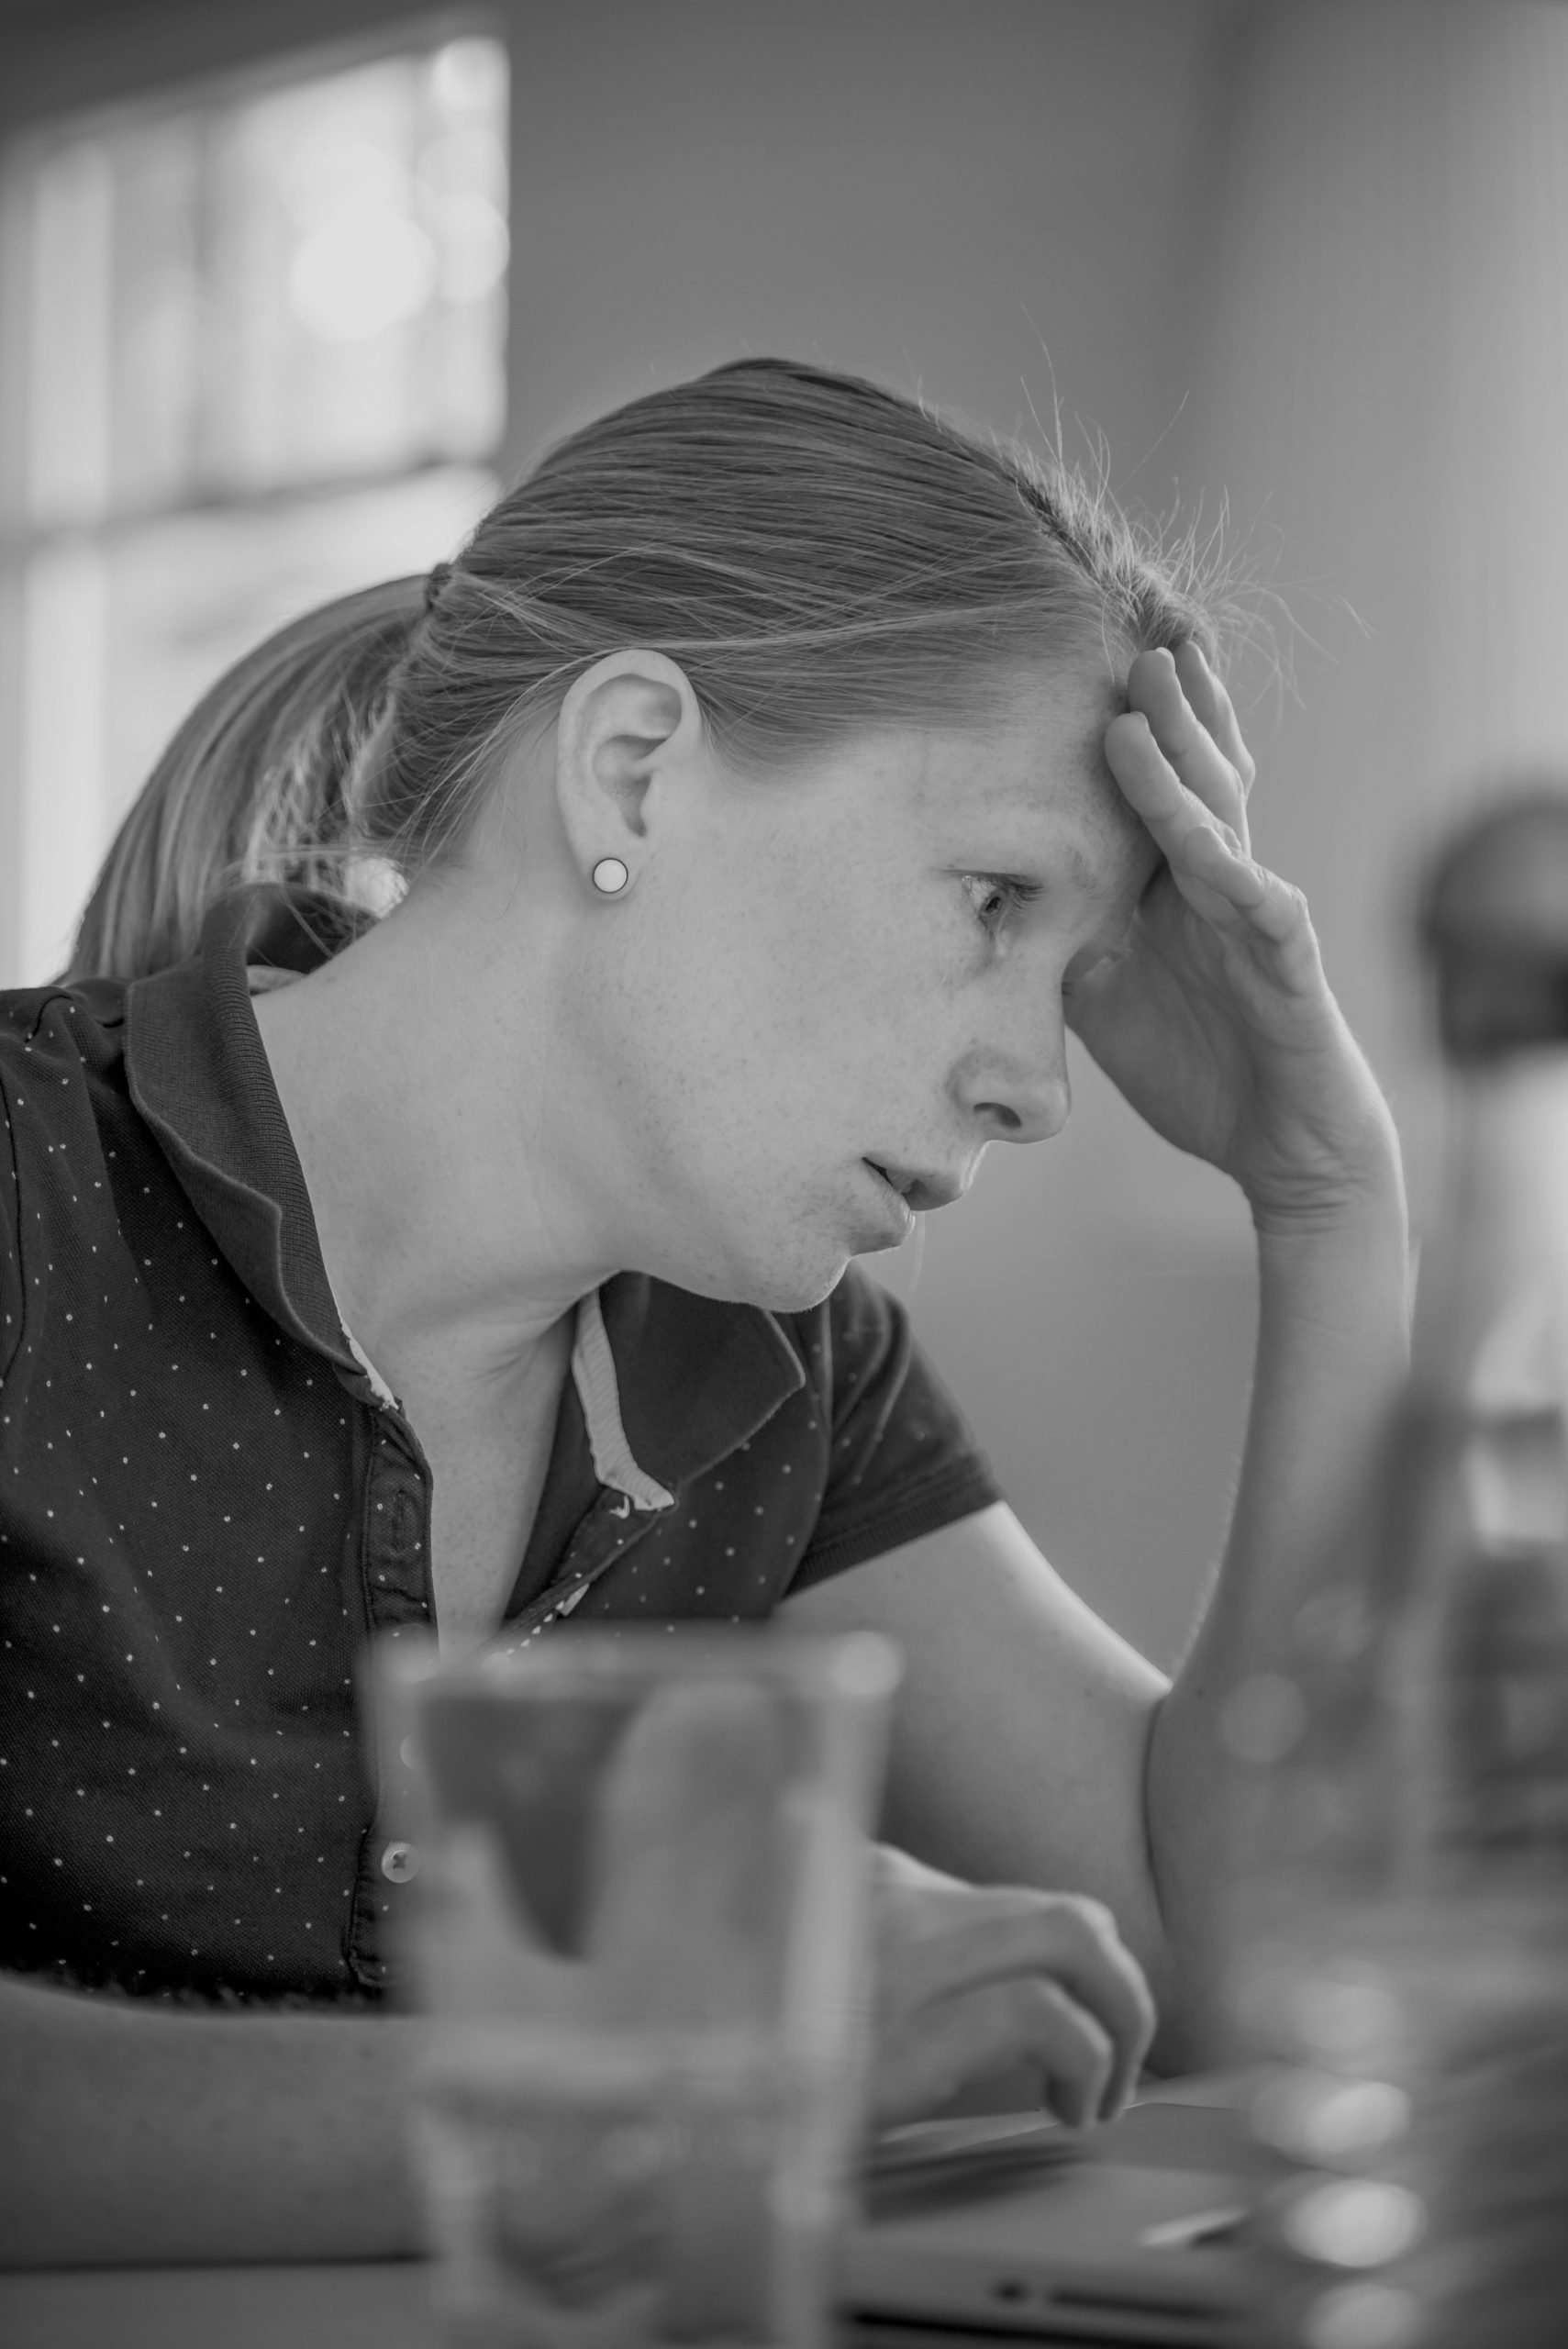 woman with stress affecting fitness with hair in ponytail and wearing a polo shirt sitting with her hand on her face at a table and with an expression of stress